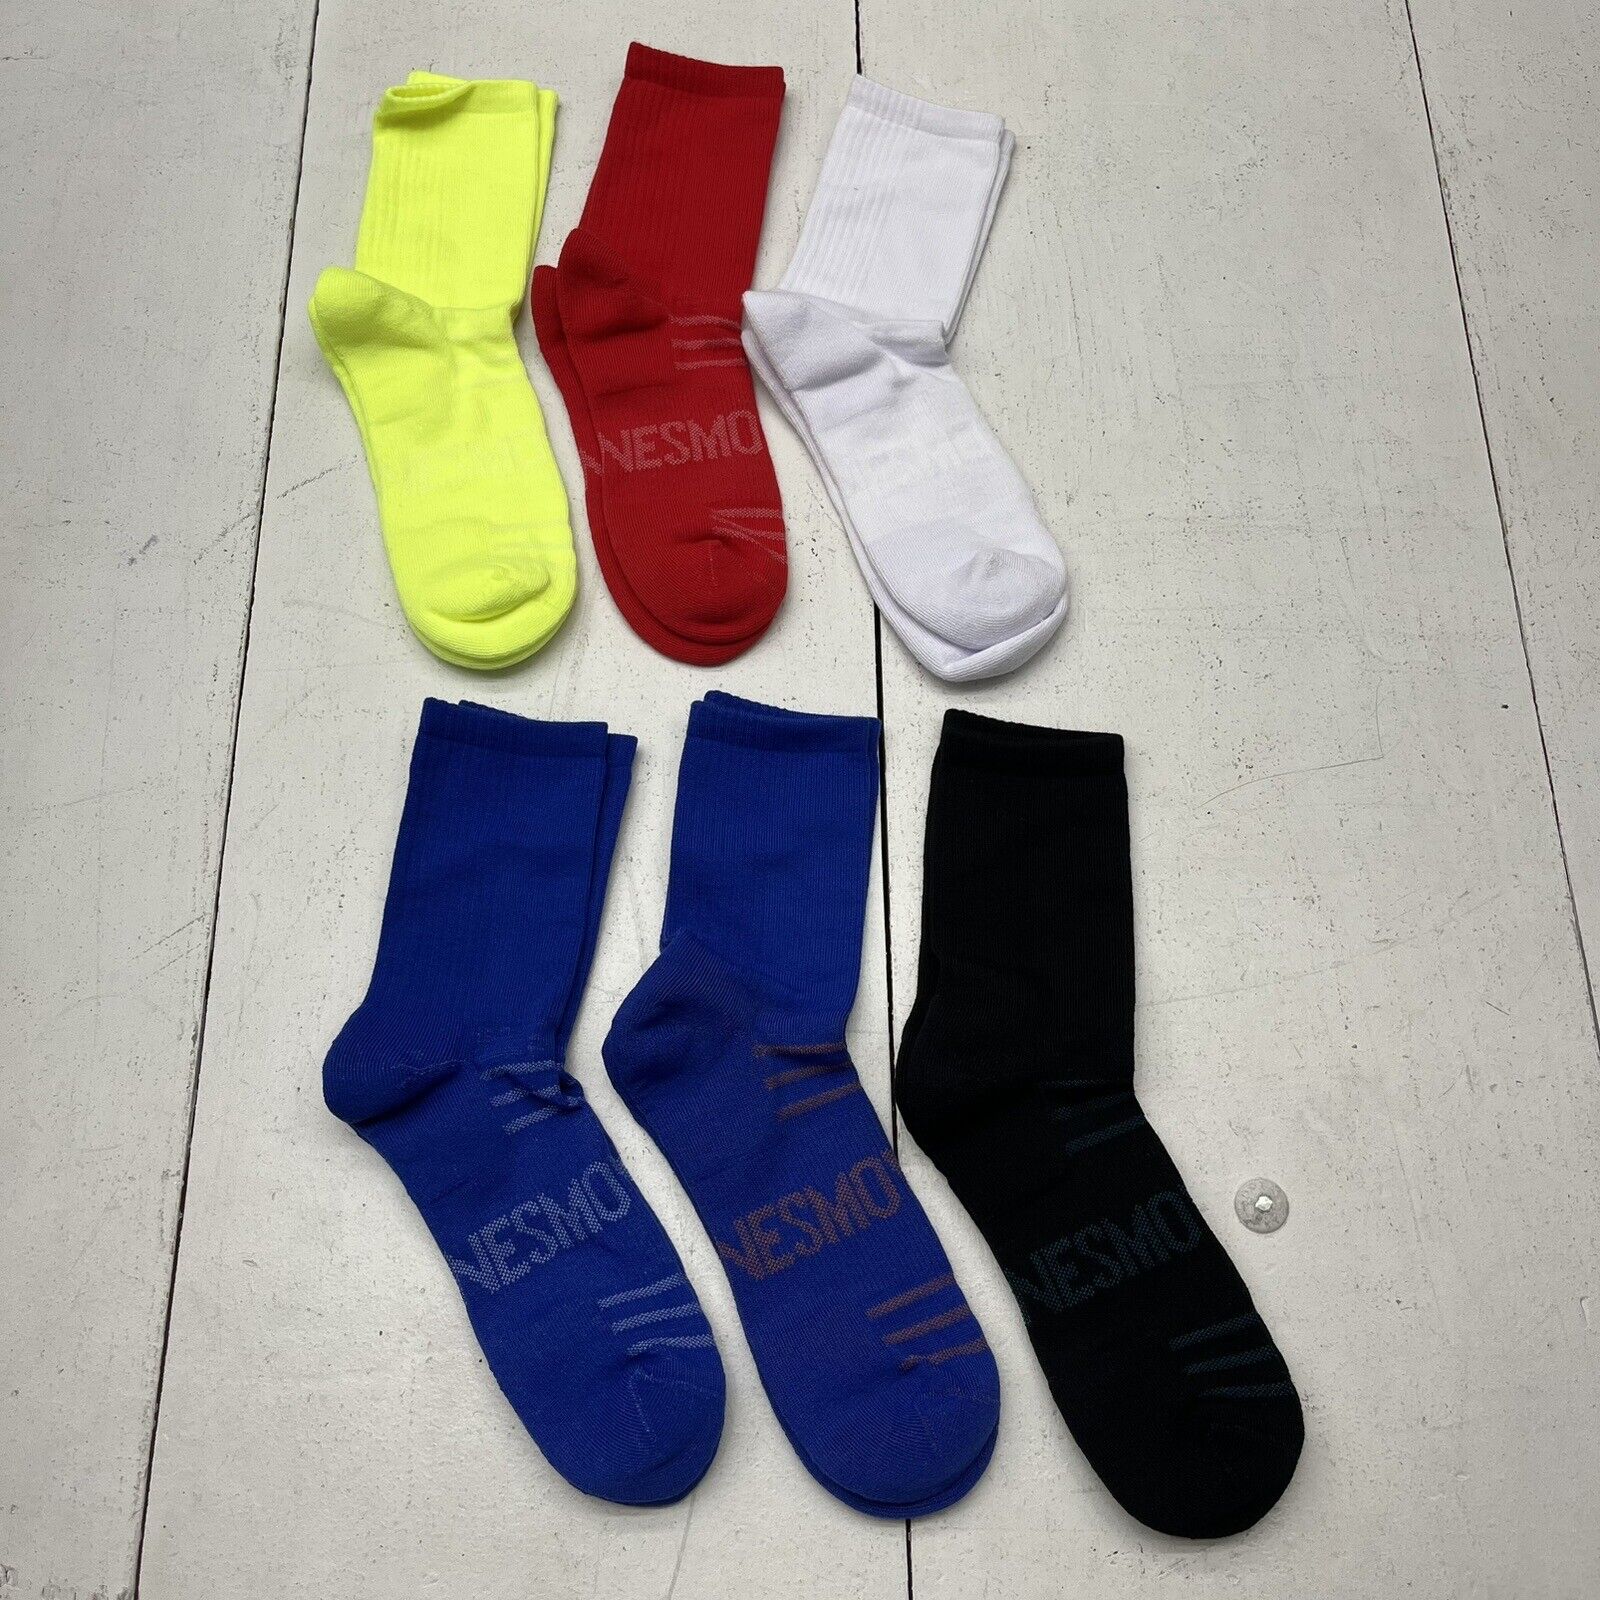 Hanes Moves Assorted 6 Pack Crew Socks Mens One Size NEW